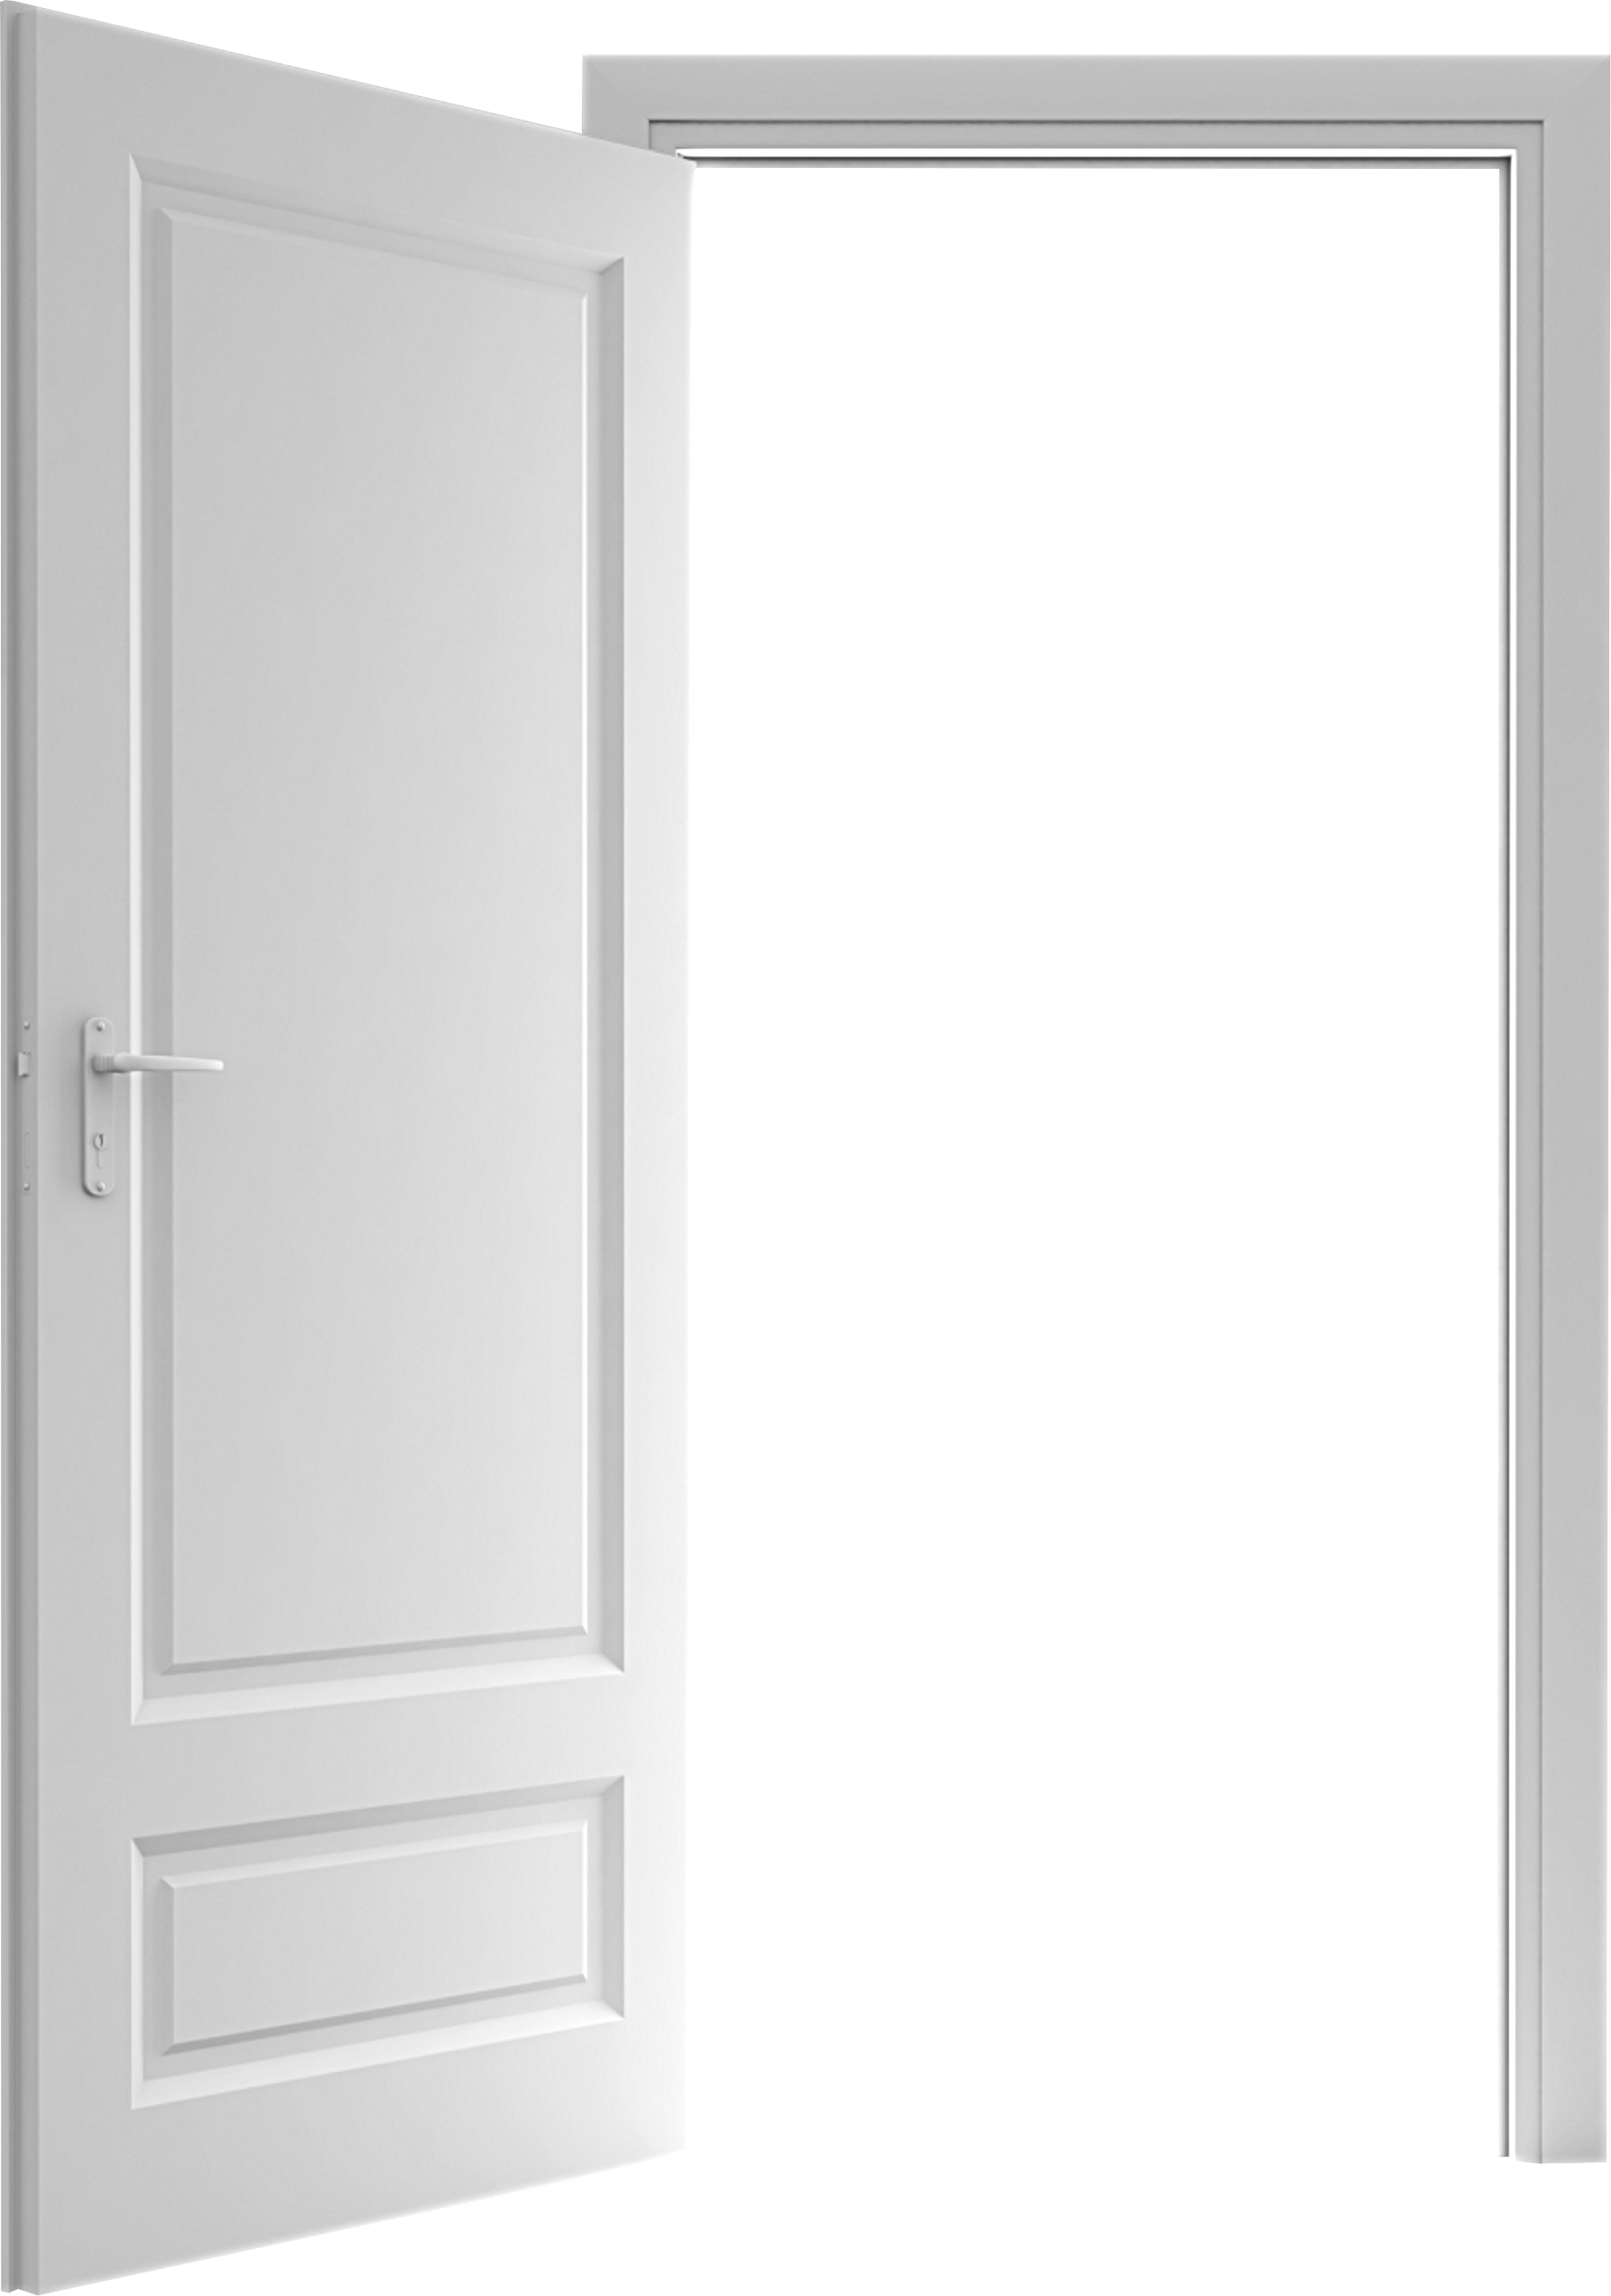 A White Door With A Black Screen